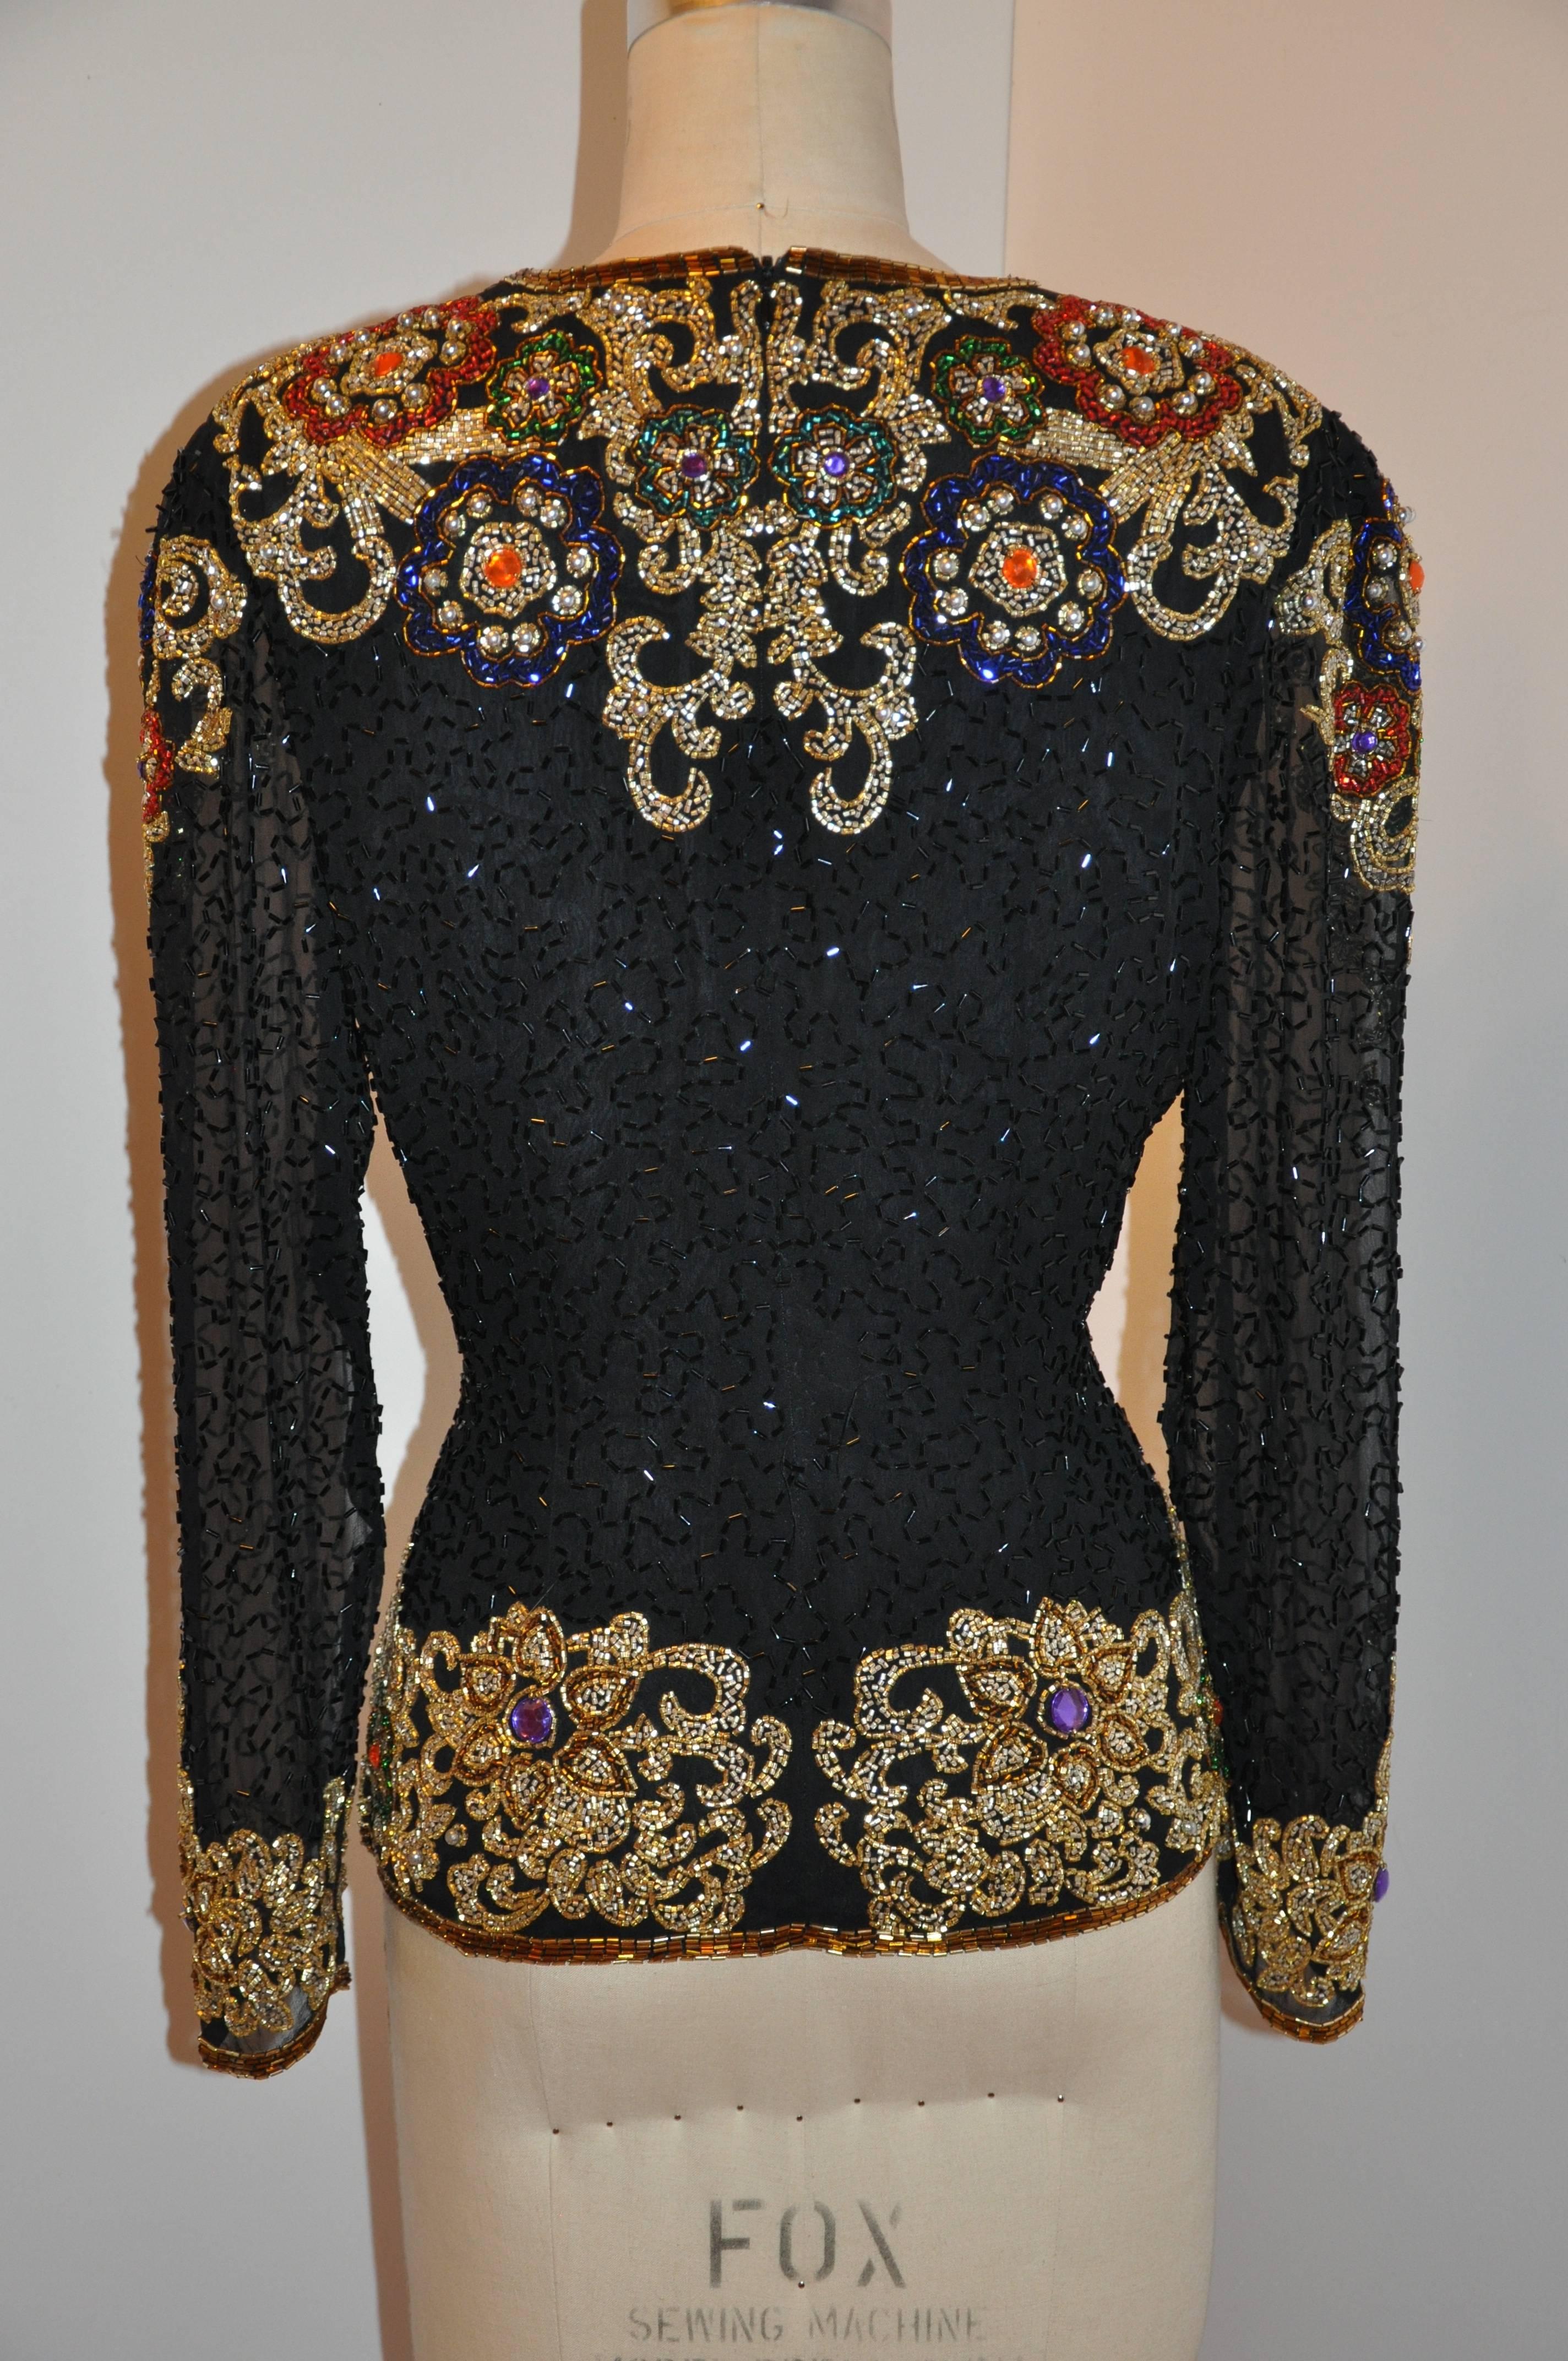 Oleg Cassini wonderfully elegant evening top detailed with multi-colors of  micro seed beading on black silk. The bodice is silk lined with matching black silk. The sleeves are detailed with sheer silk chiffon with detailed seed beading as well. The